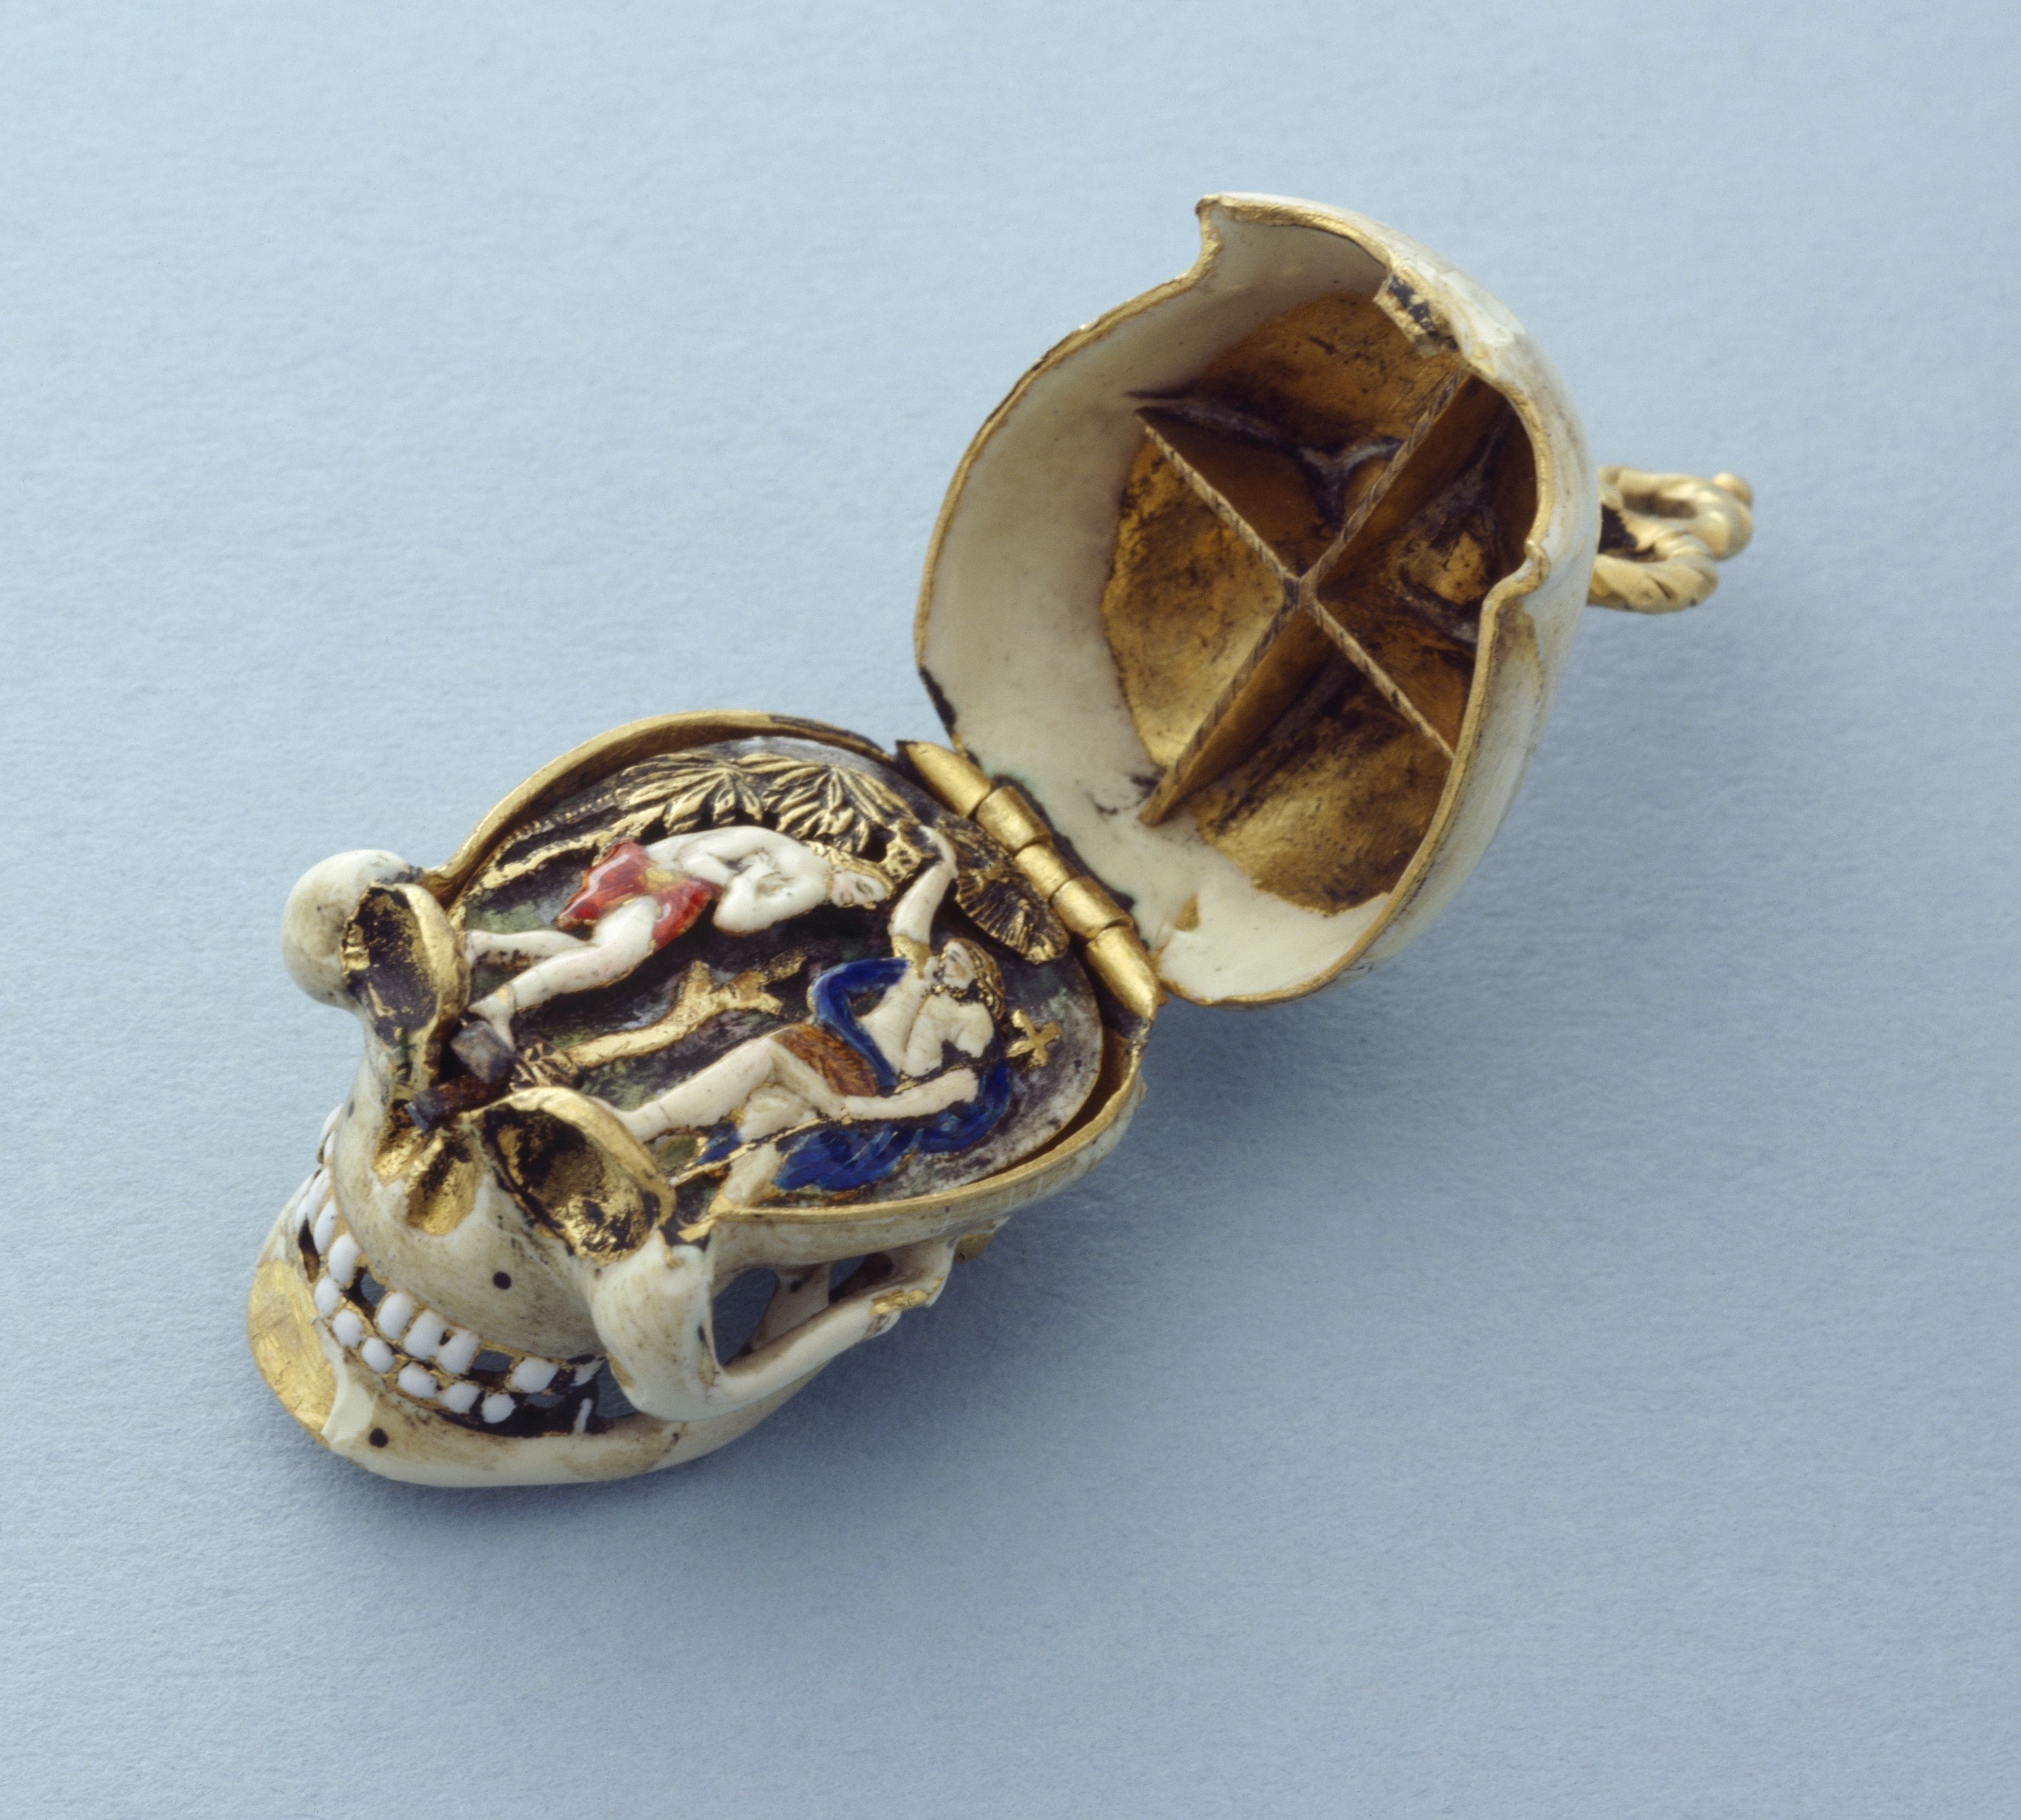 Enamelled skull pomander with Baptism of Christ plaque (skull open) (Trustees of the Wernher Collection)